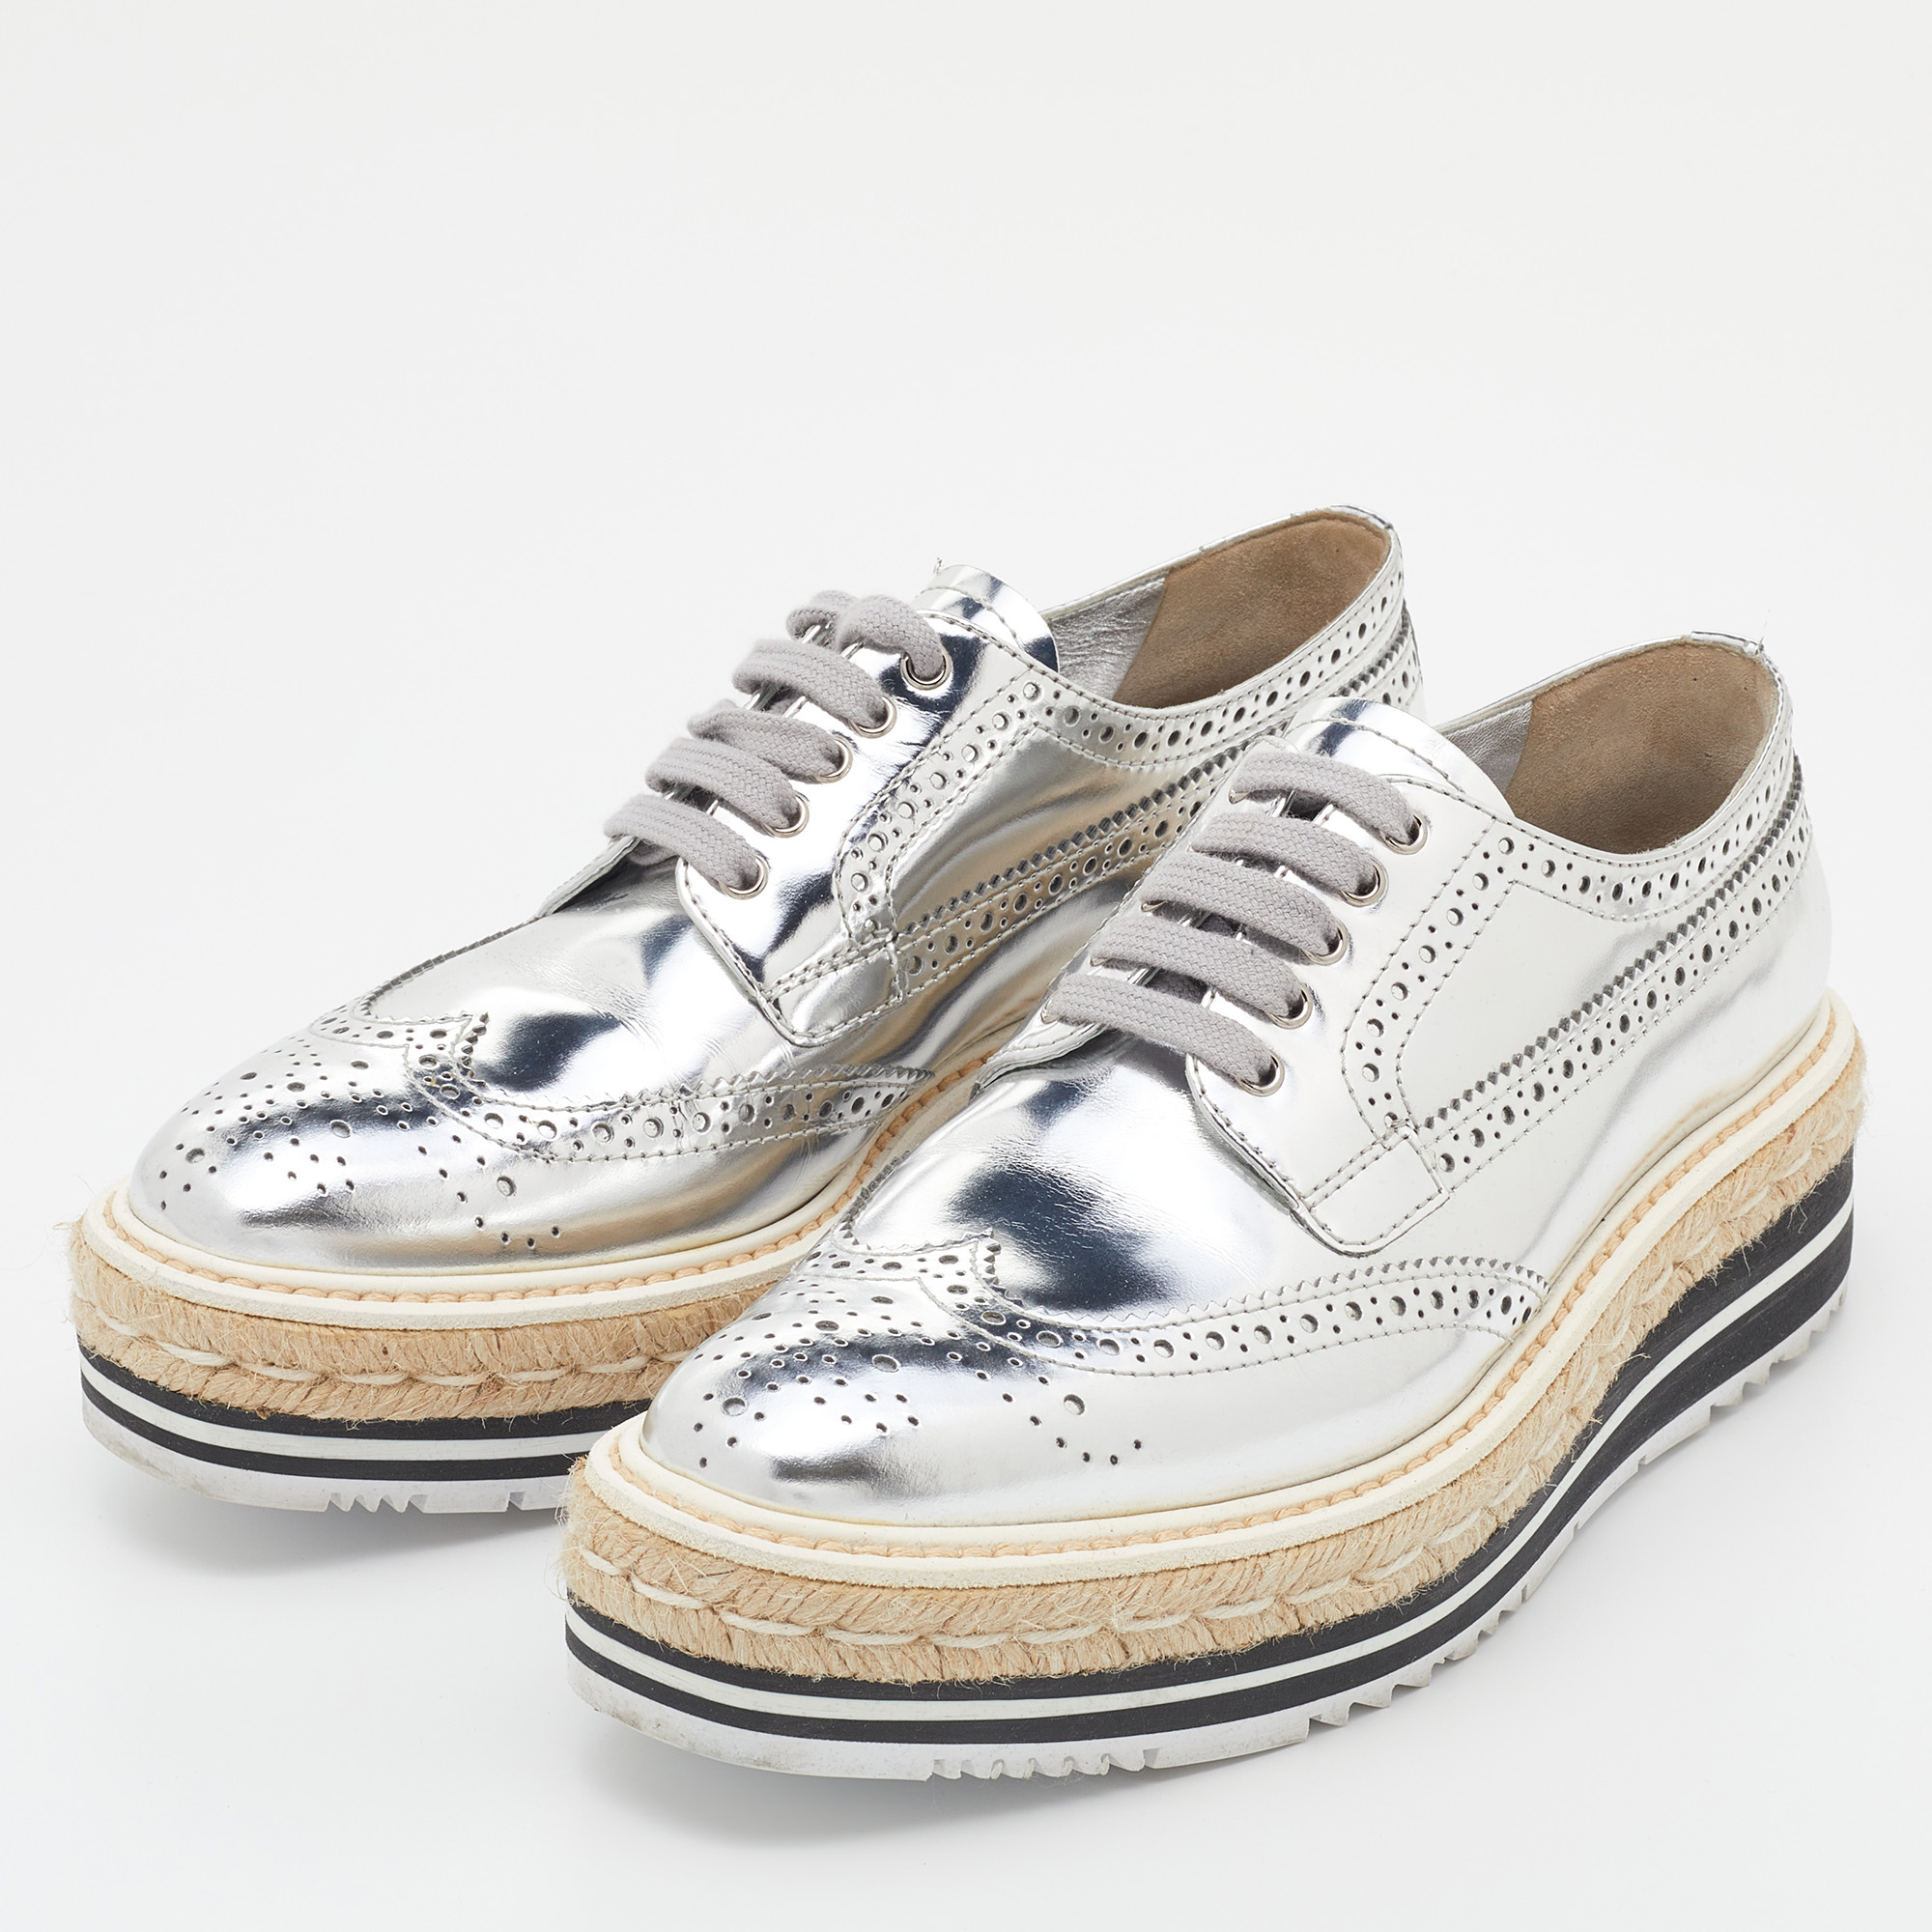 

Prada Silver Brogue Leather Derby Espadrille Sneakers Size